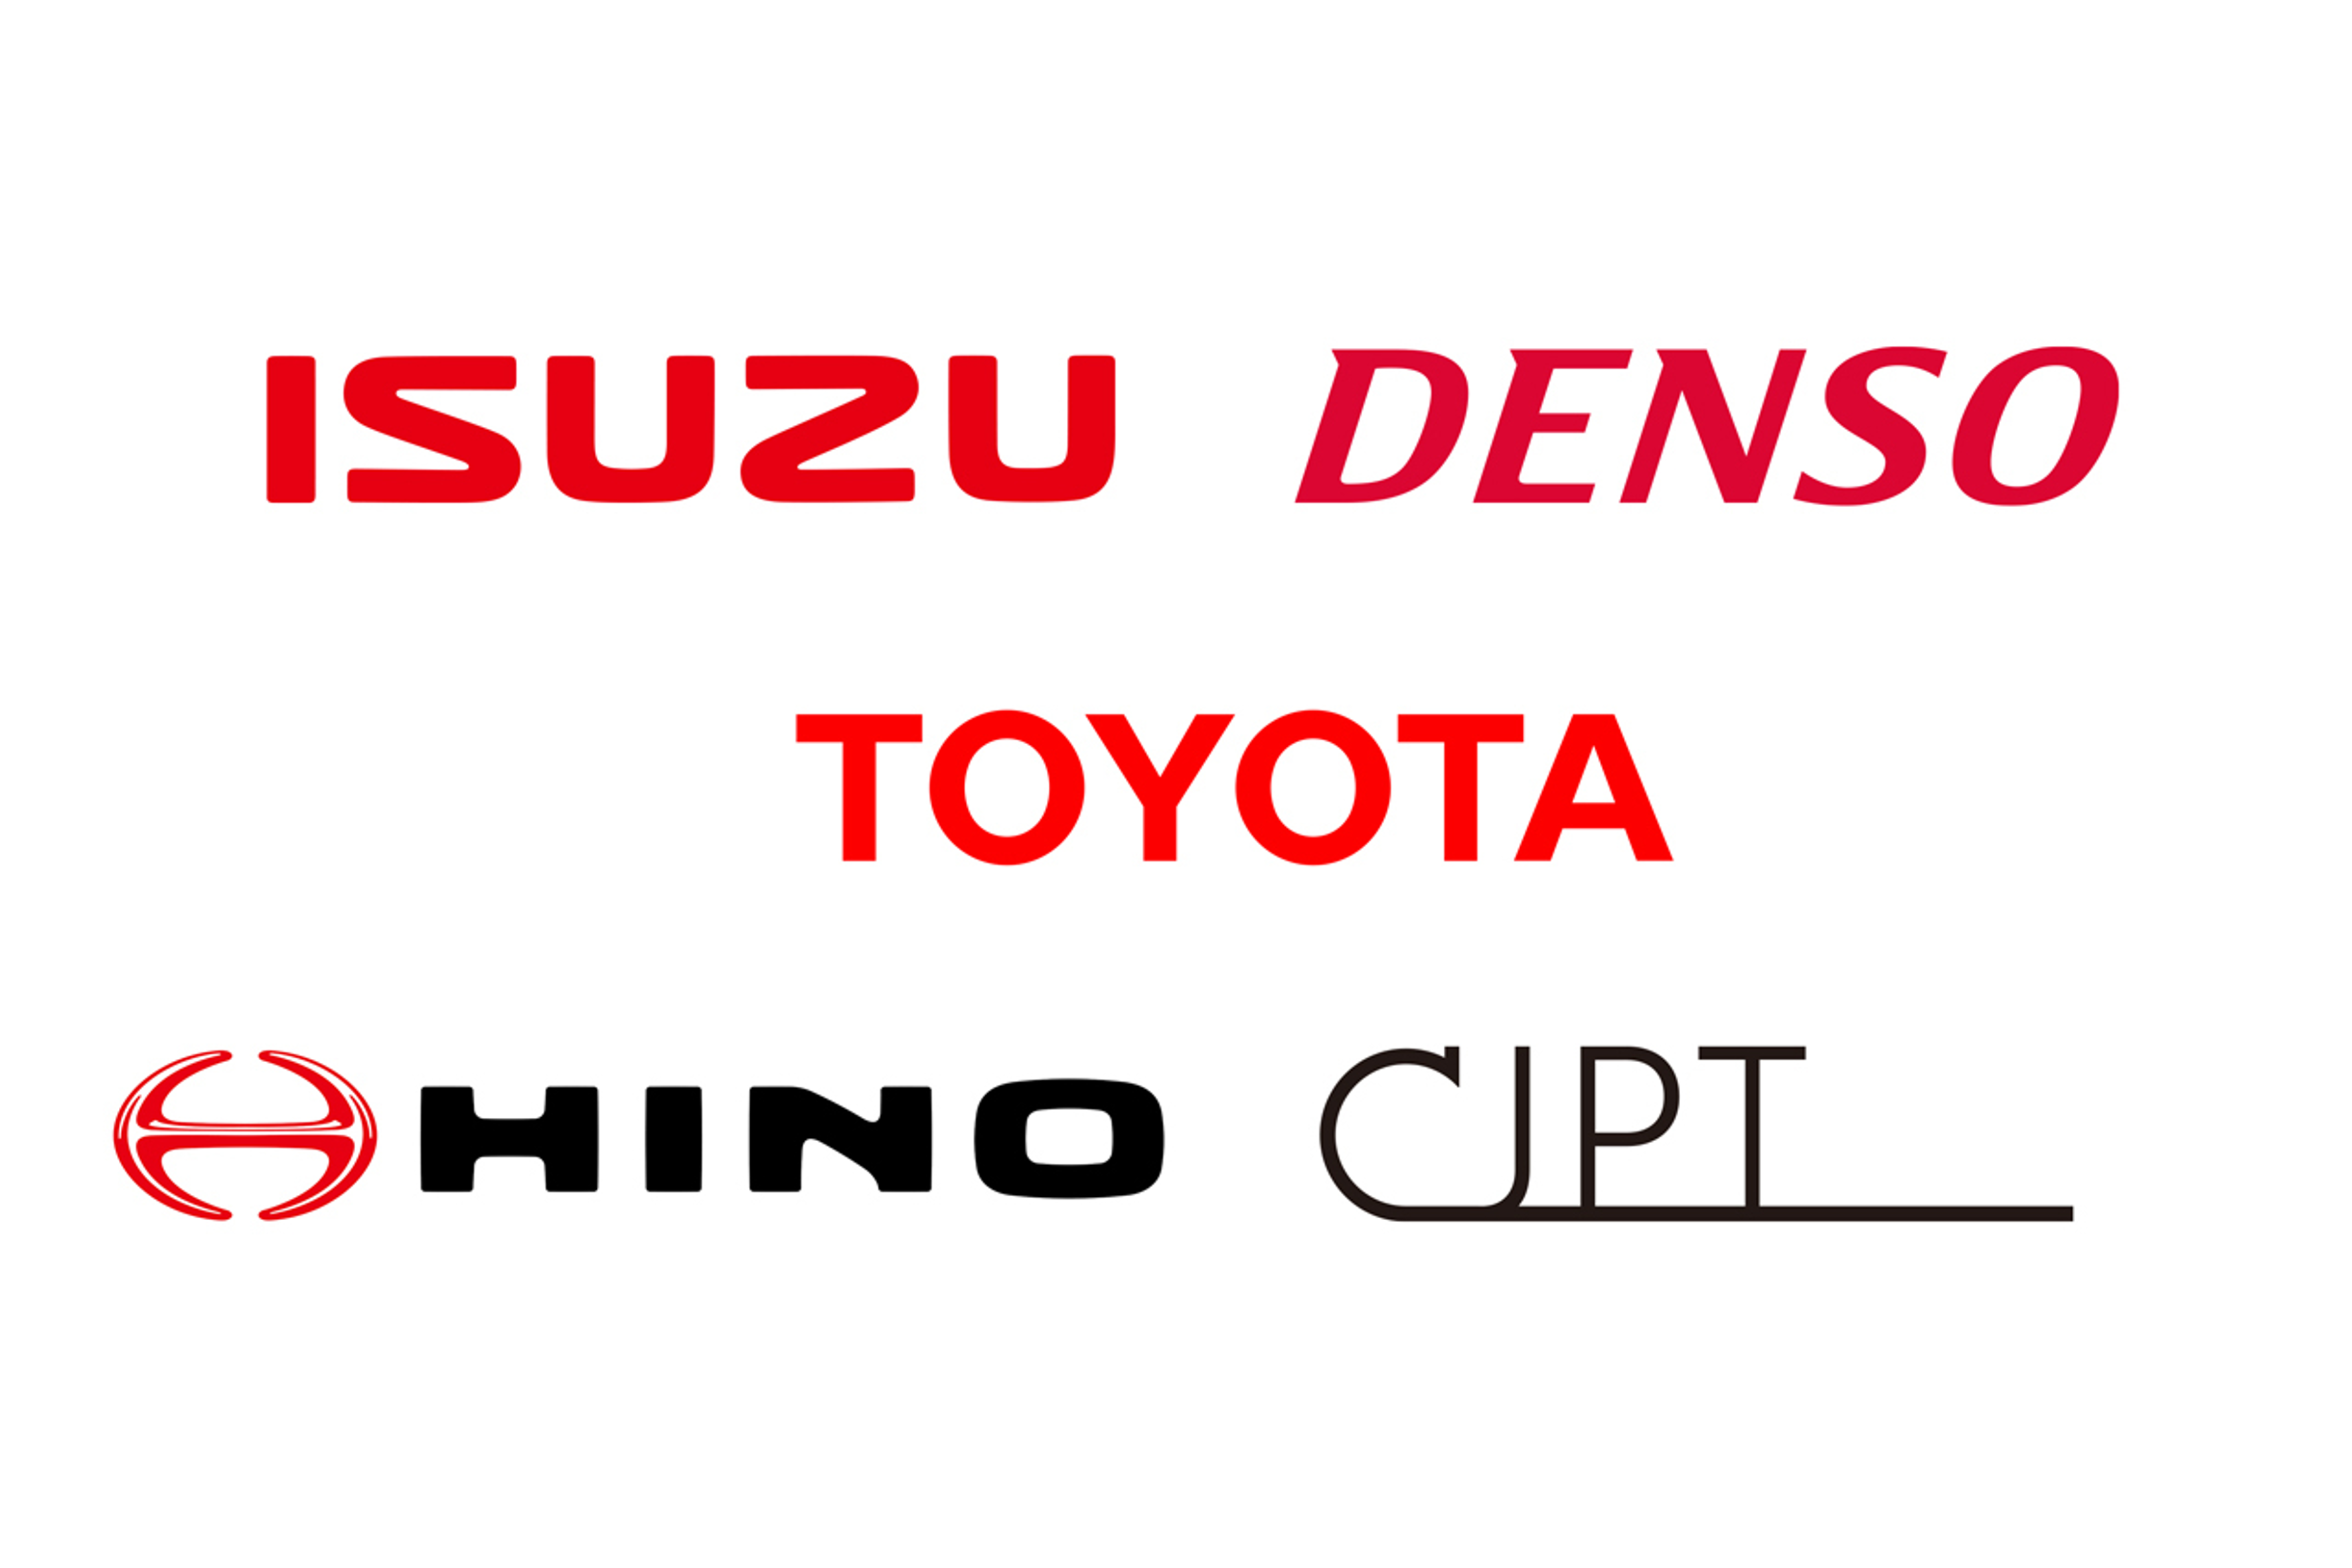 Isuzu, DENSO, Toyota, Hino, and CJPT to Start Planning and Foundational Research on Hydrogen Engines for Heavy-Duty Commercial Vehicles